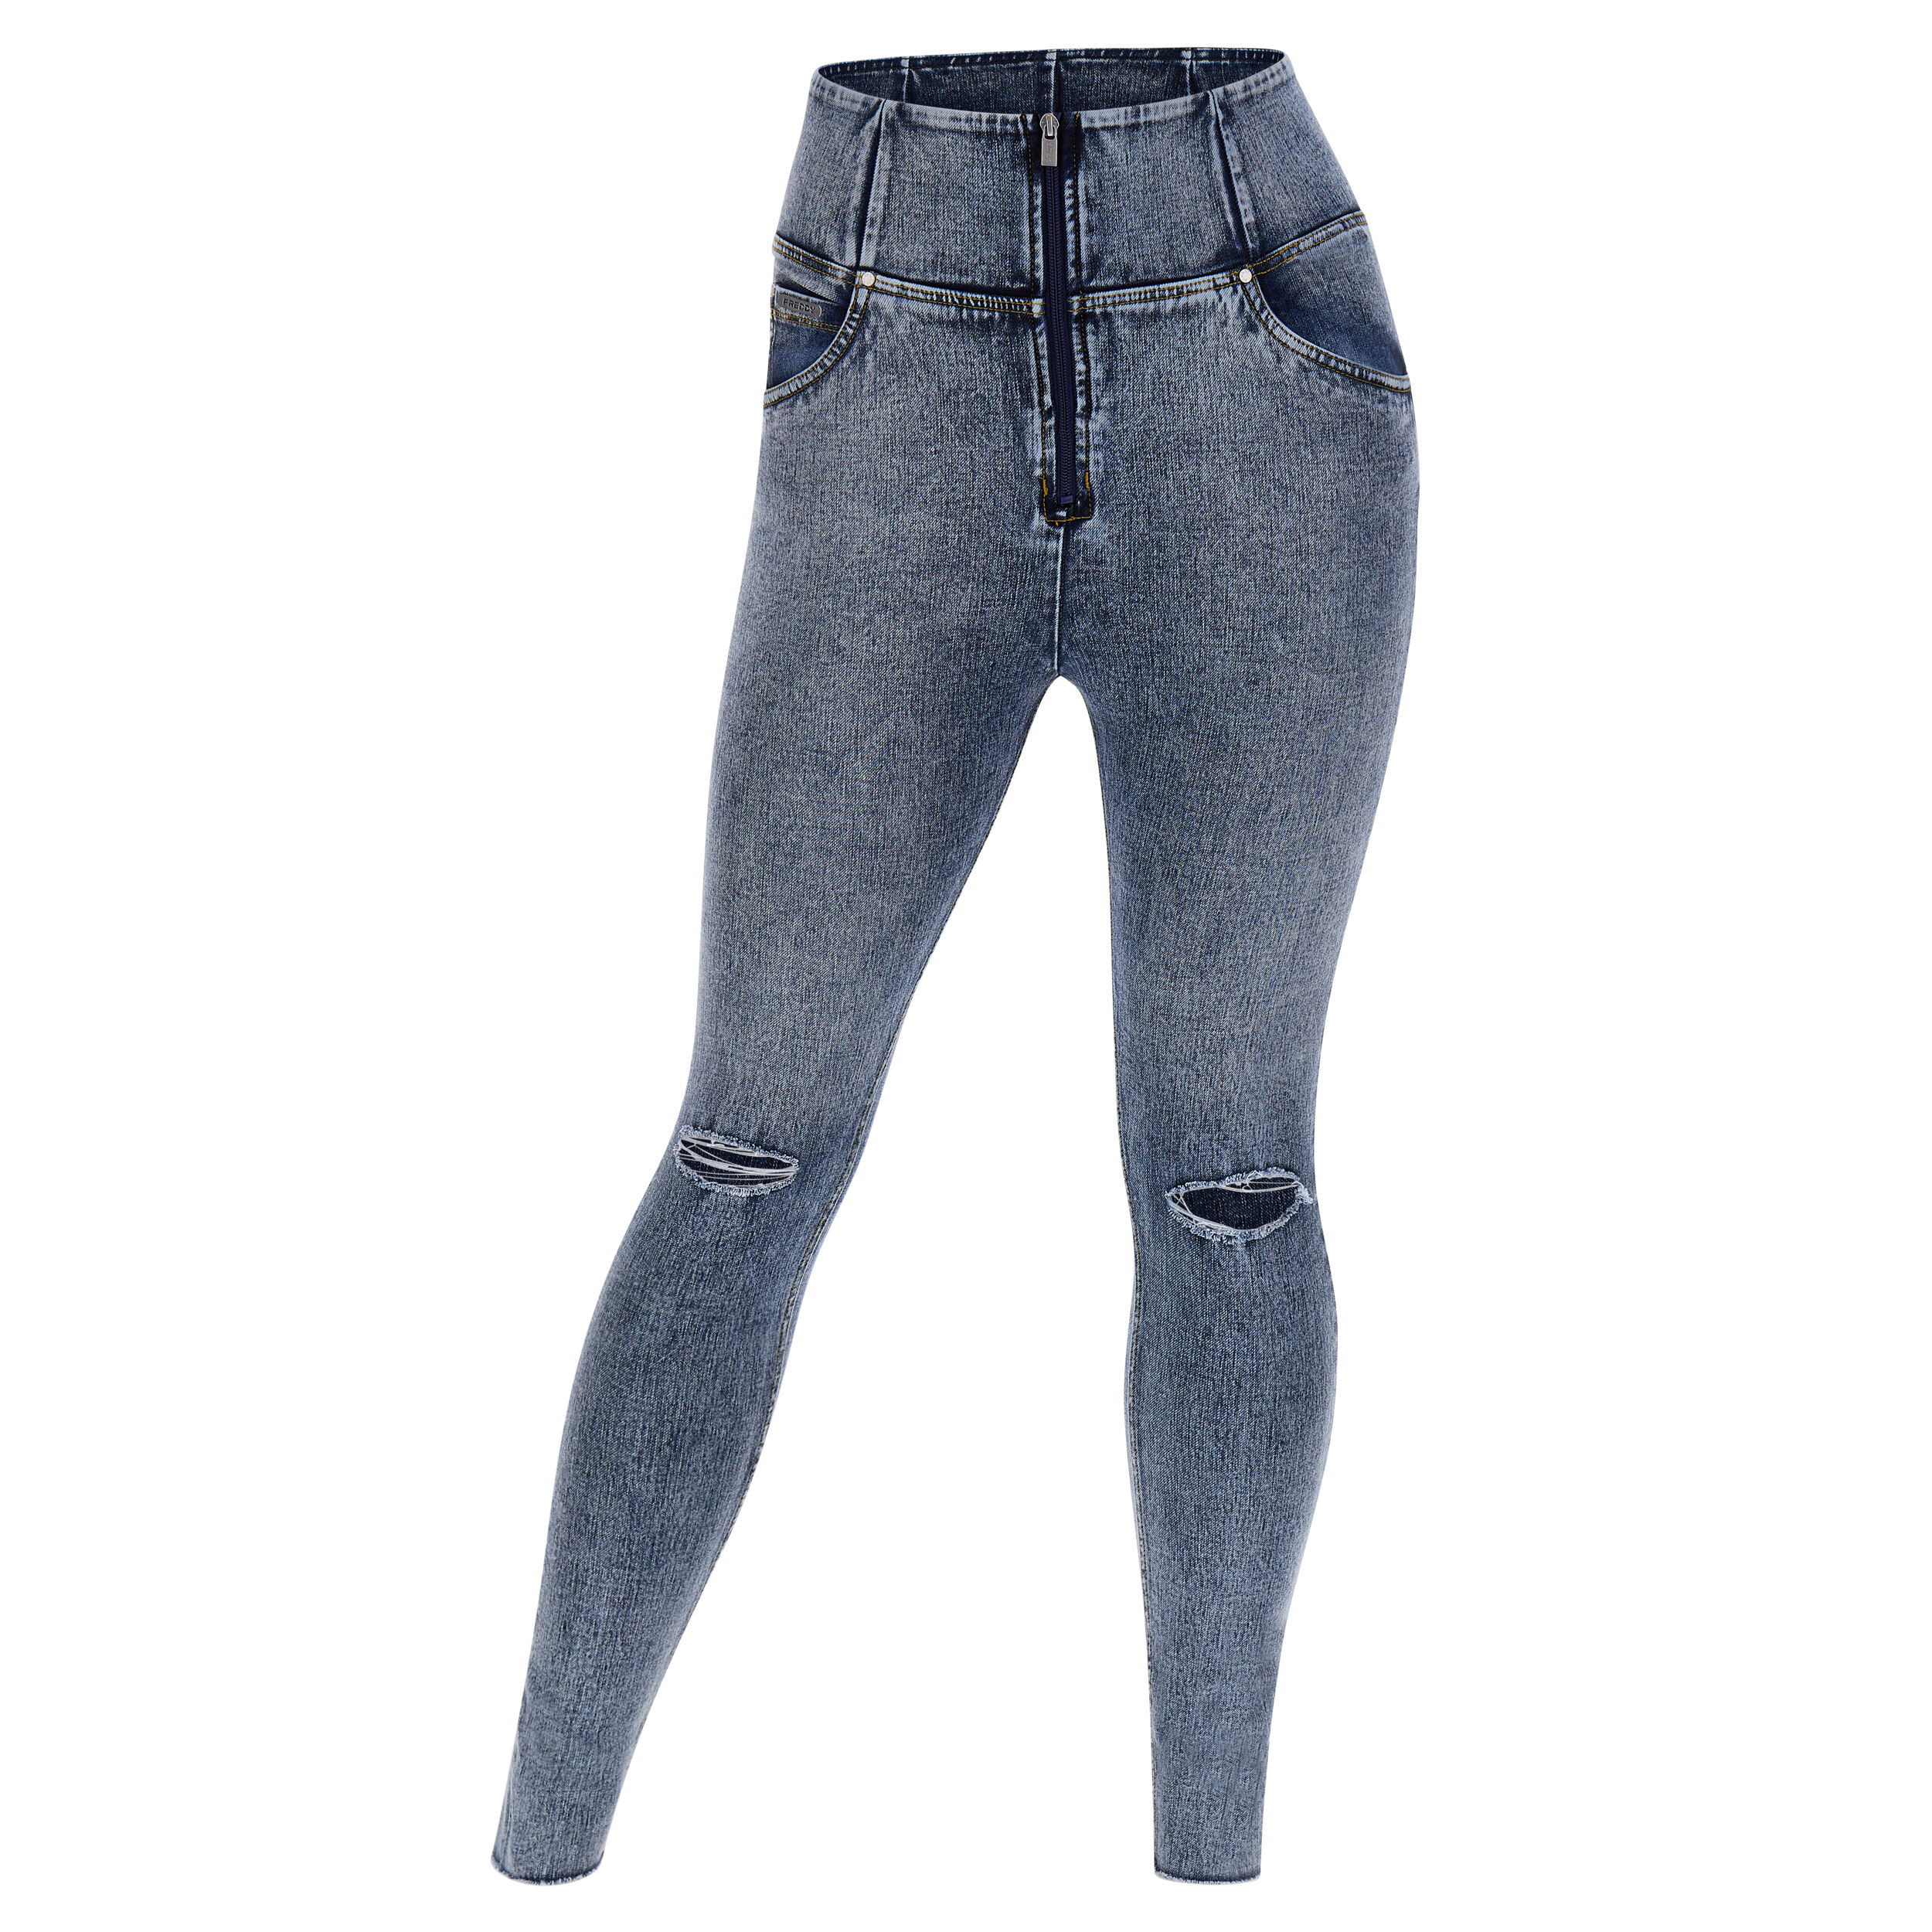 Freddy Jeans push up WR.UP® 7/8 curvy vita alta denim marble wash Jeans Slavato-Cuciture Gialle Donna Large